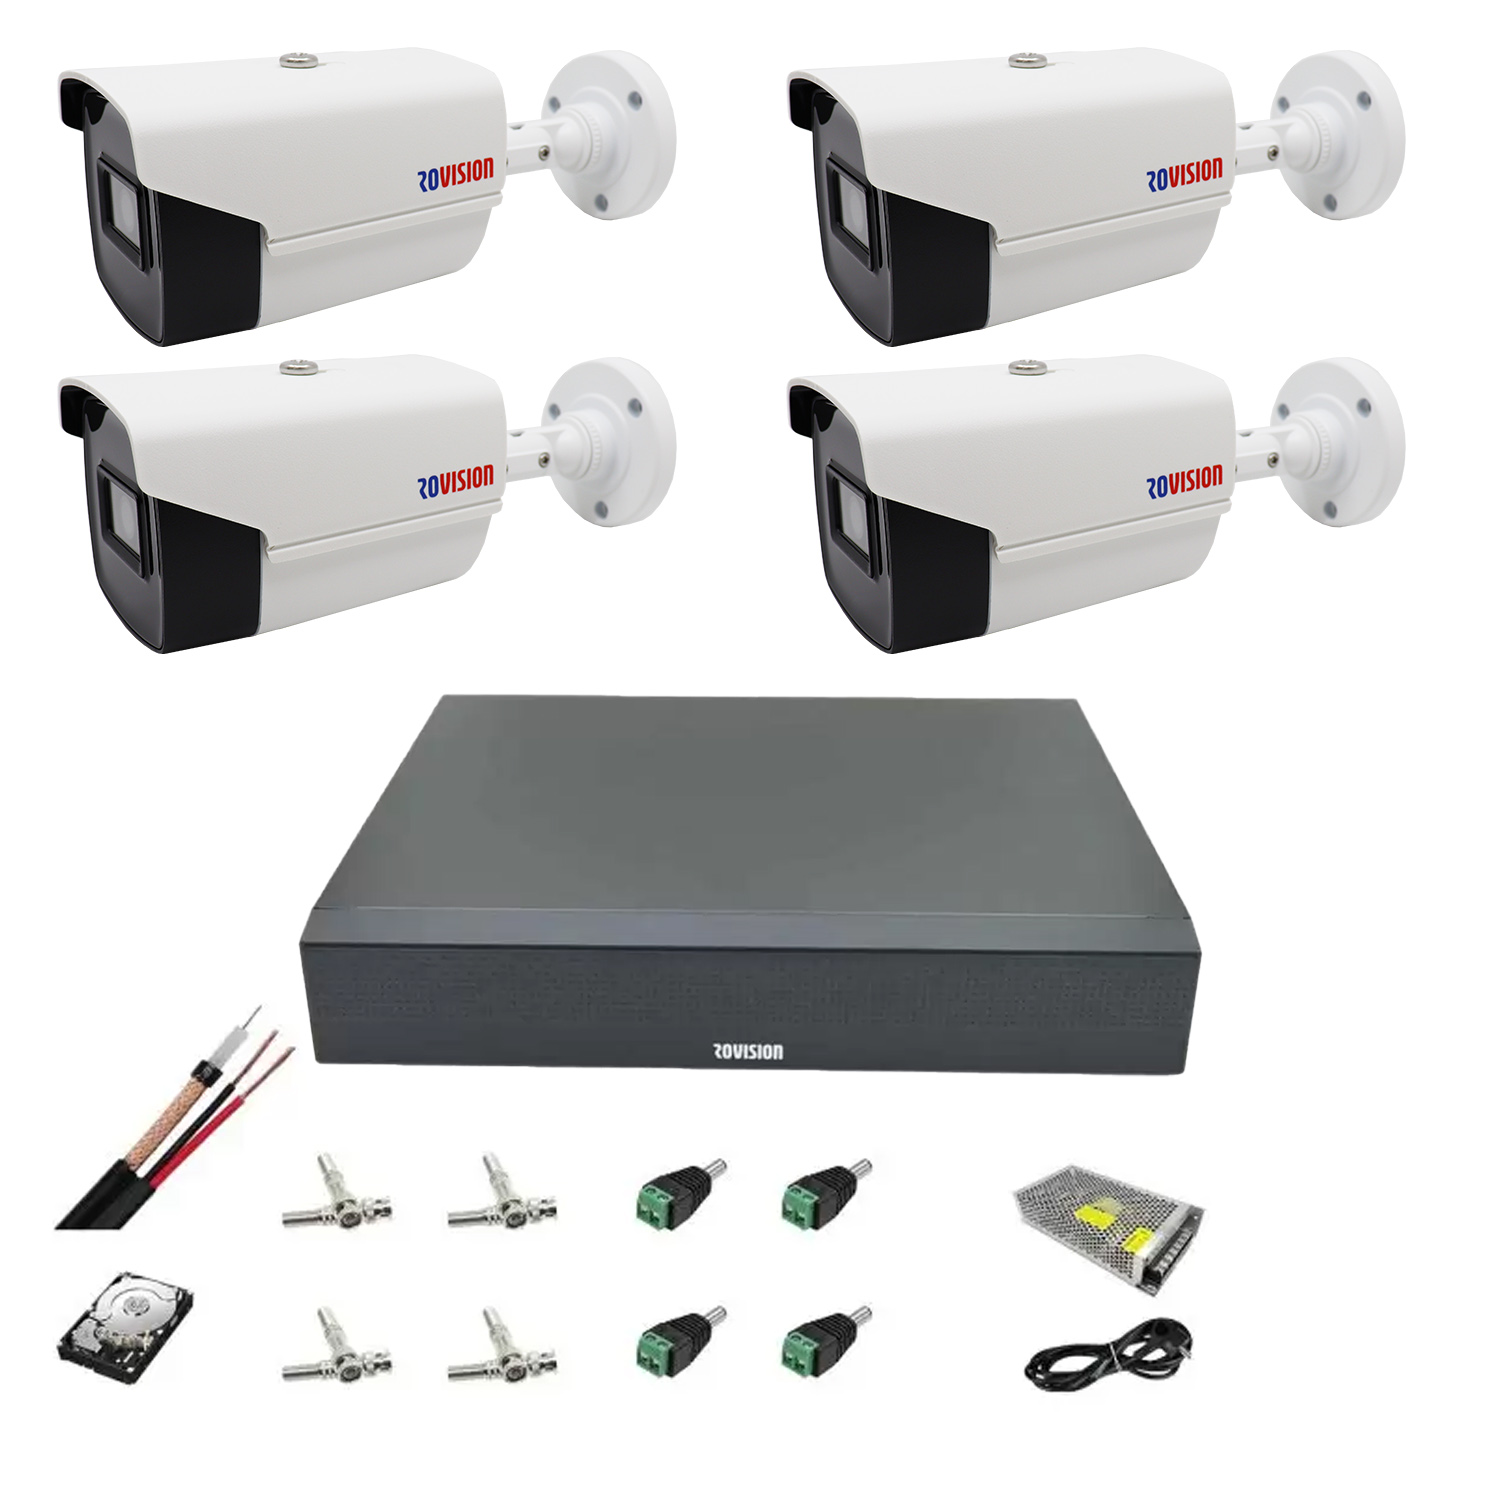 Sistem complet 4 camere supraveghere video full hd Rovision accesorii si hard SafetyGuard Surveillance